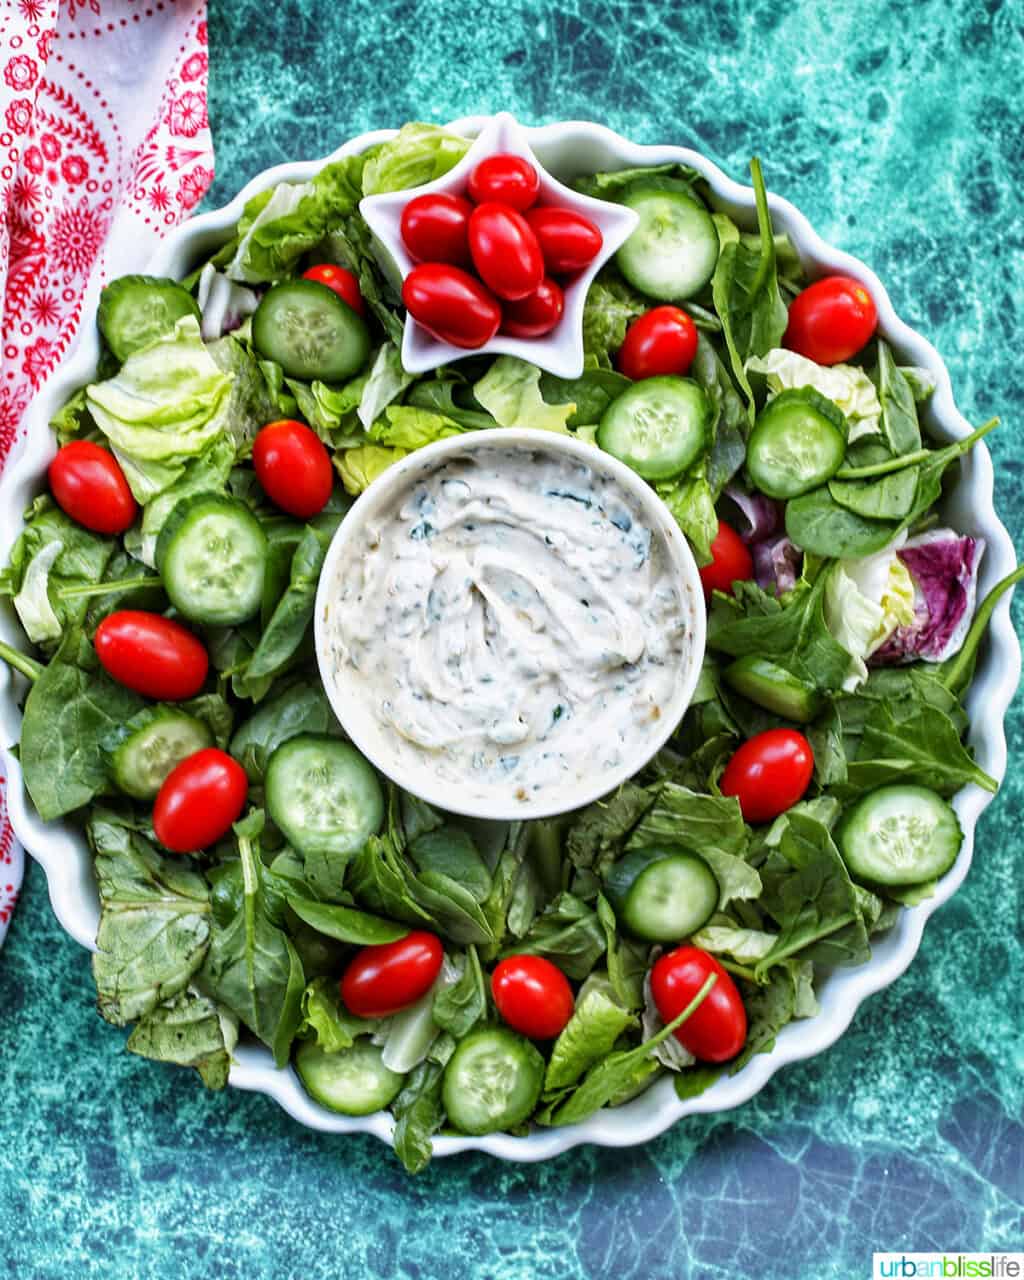 Christmas salad wreath with dairy-free spinach dip